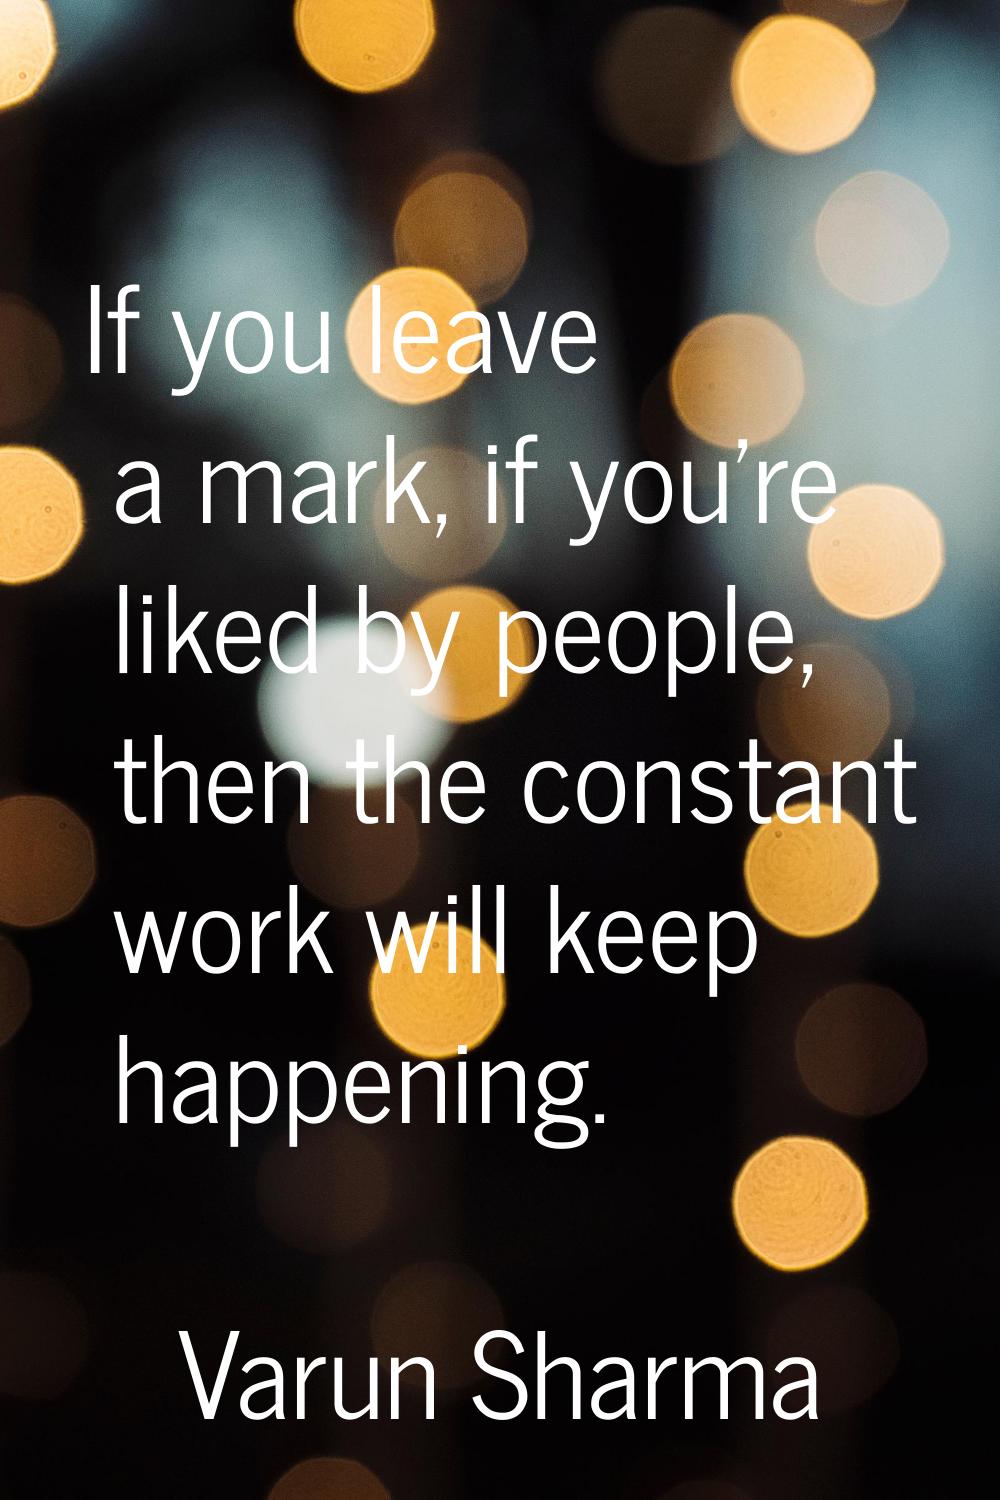 If you leave a mark, if you're liked by people, then the constant work will keep happening.